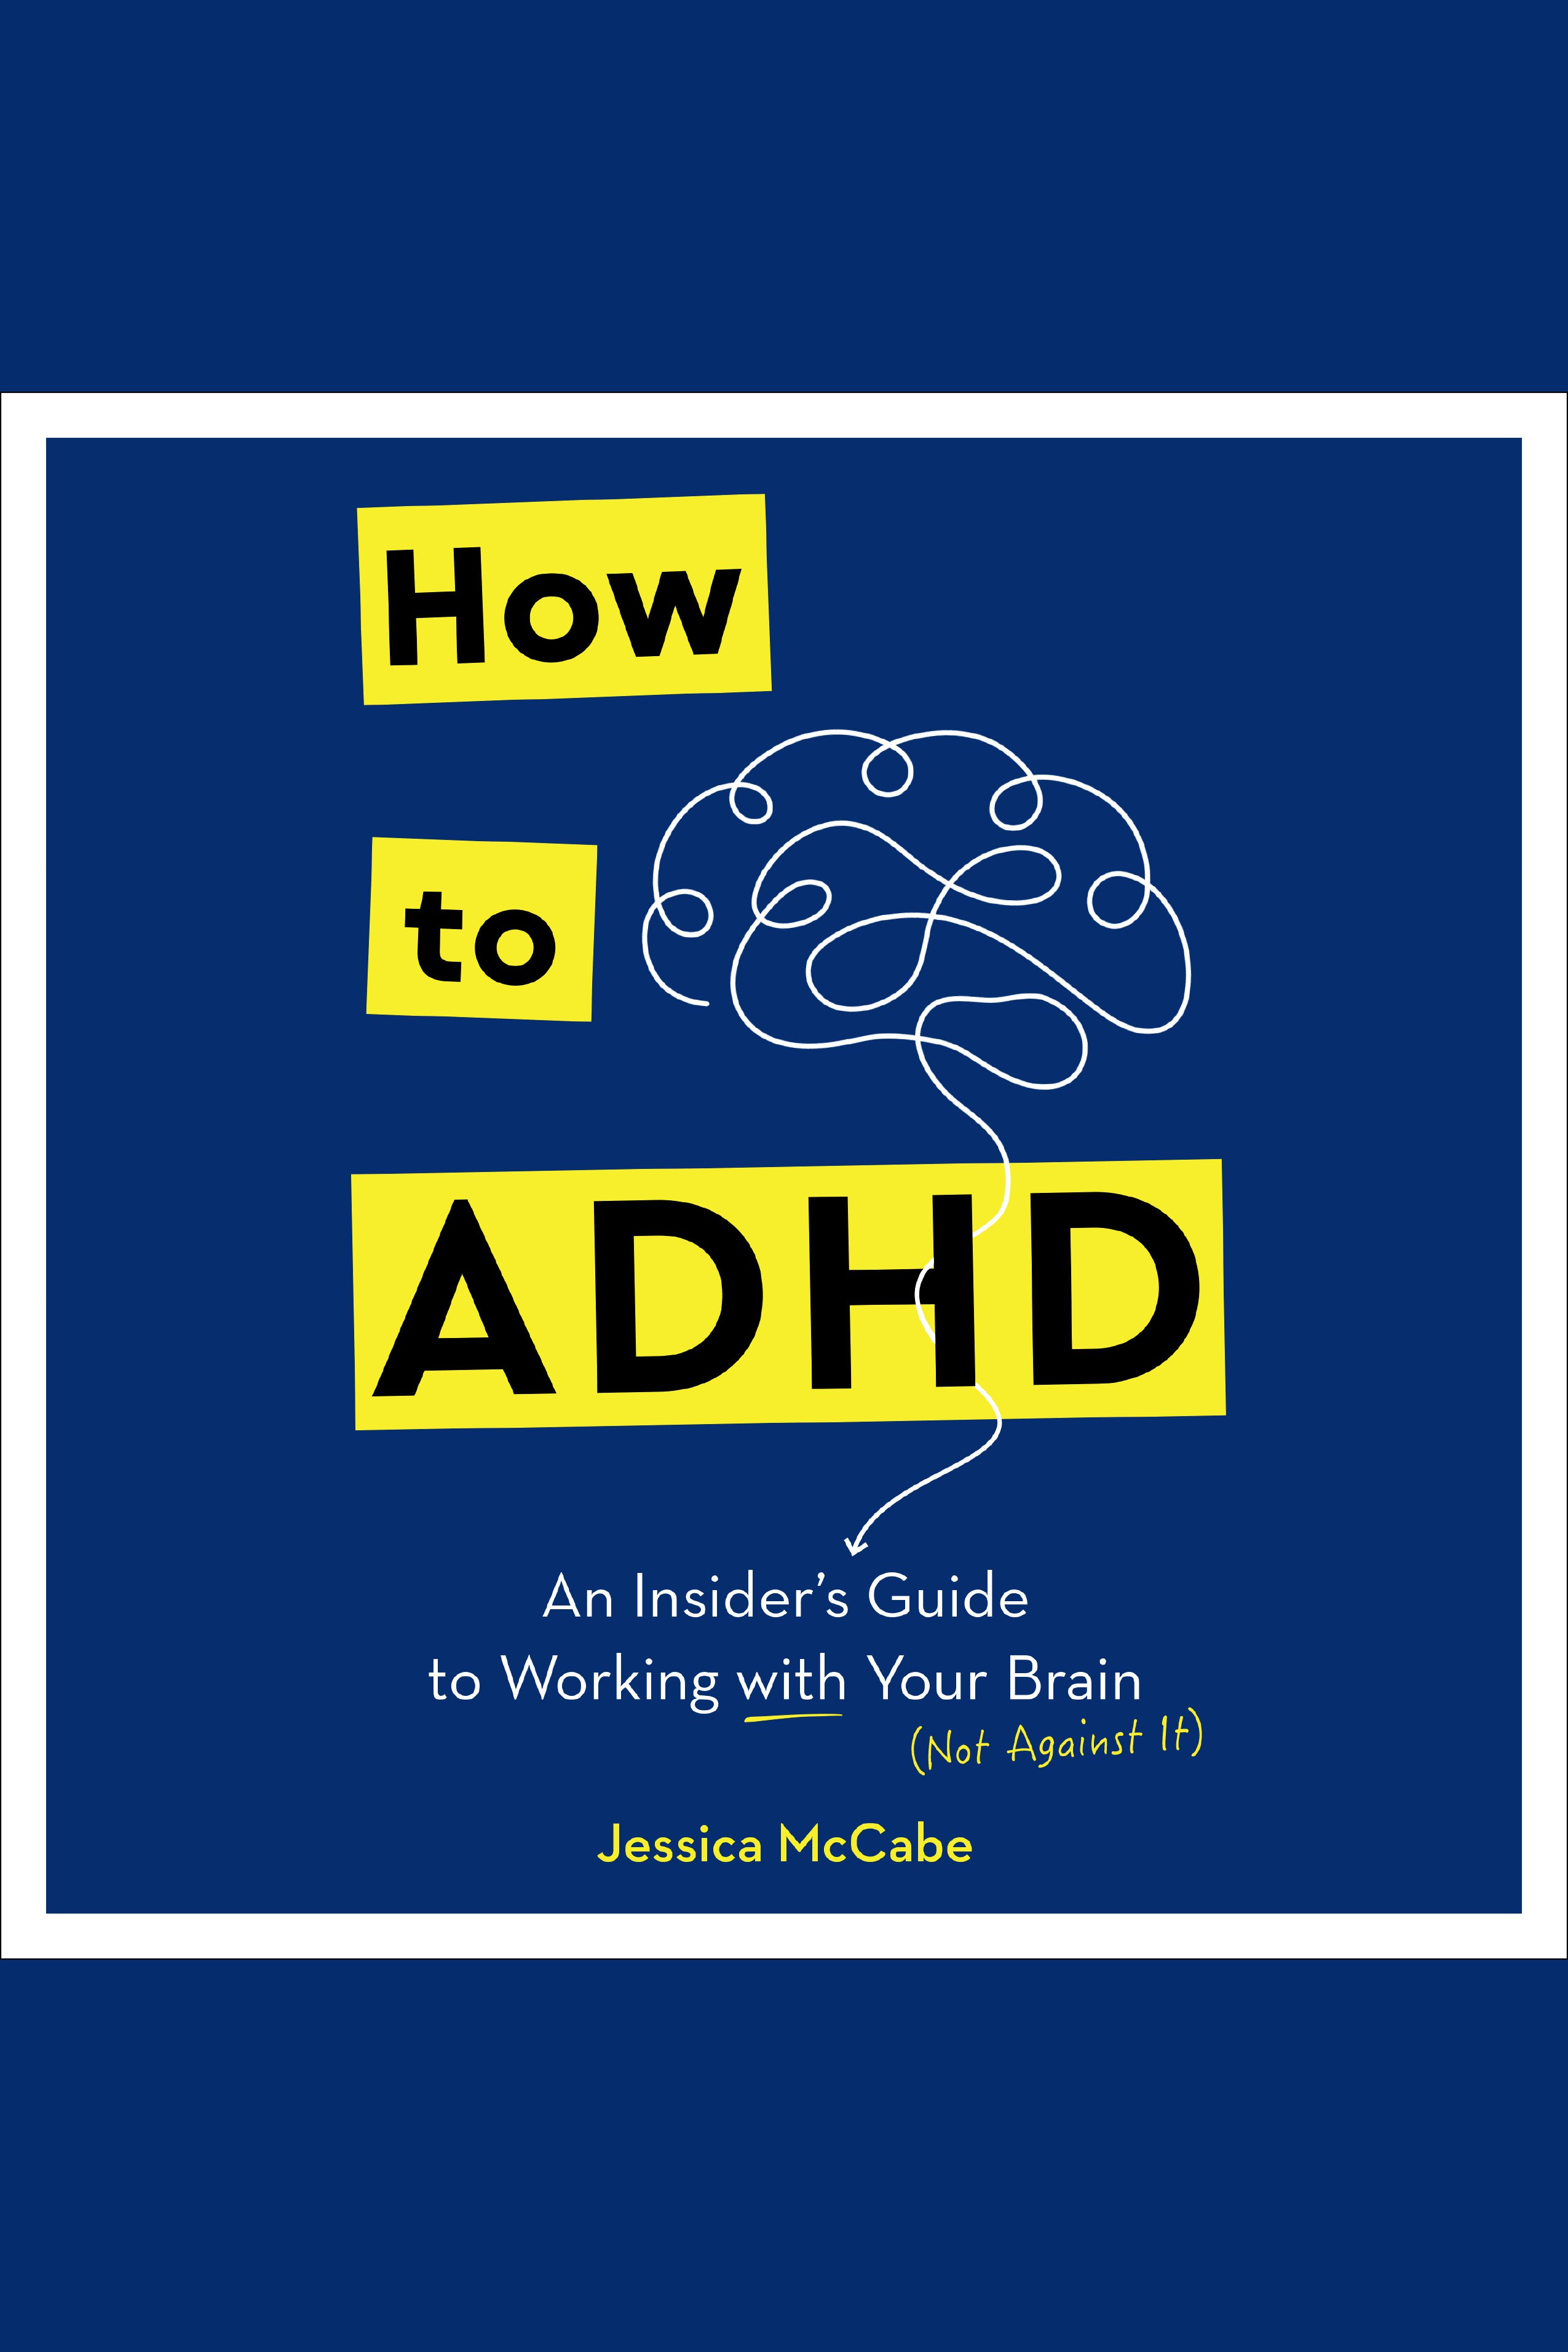 How to ADHD An Insider's Guide to Working with Your Brain (Not Against It) cover image